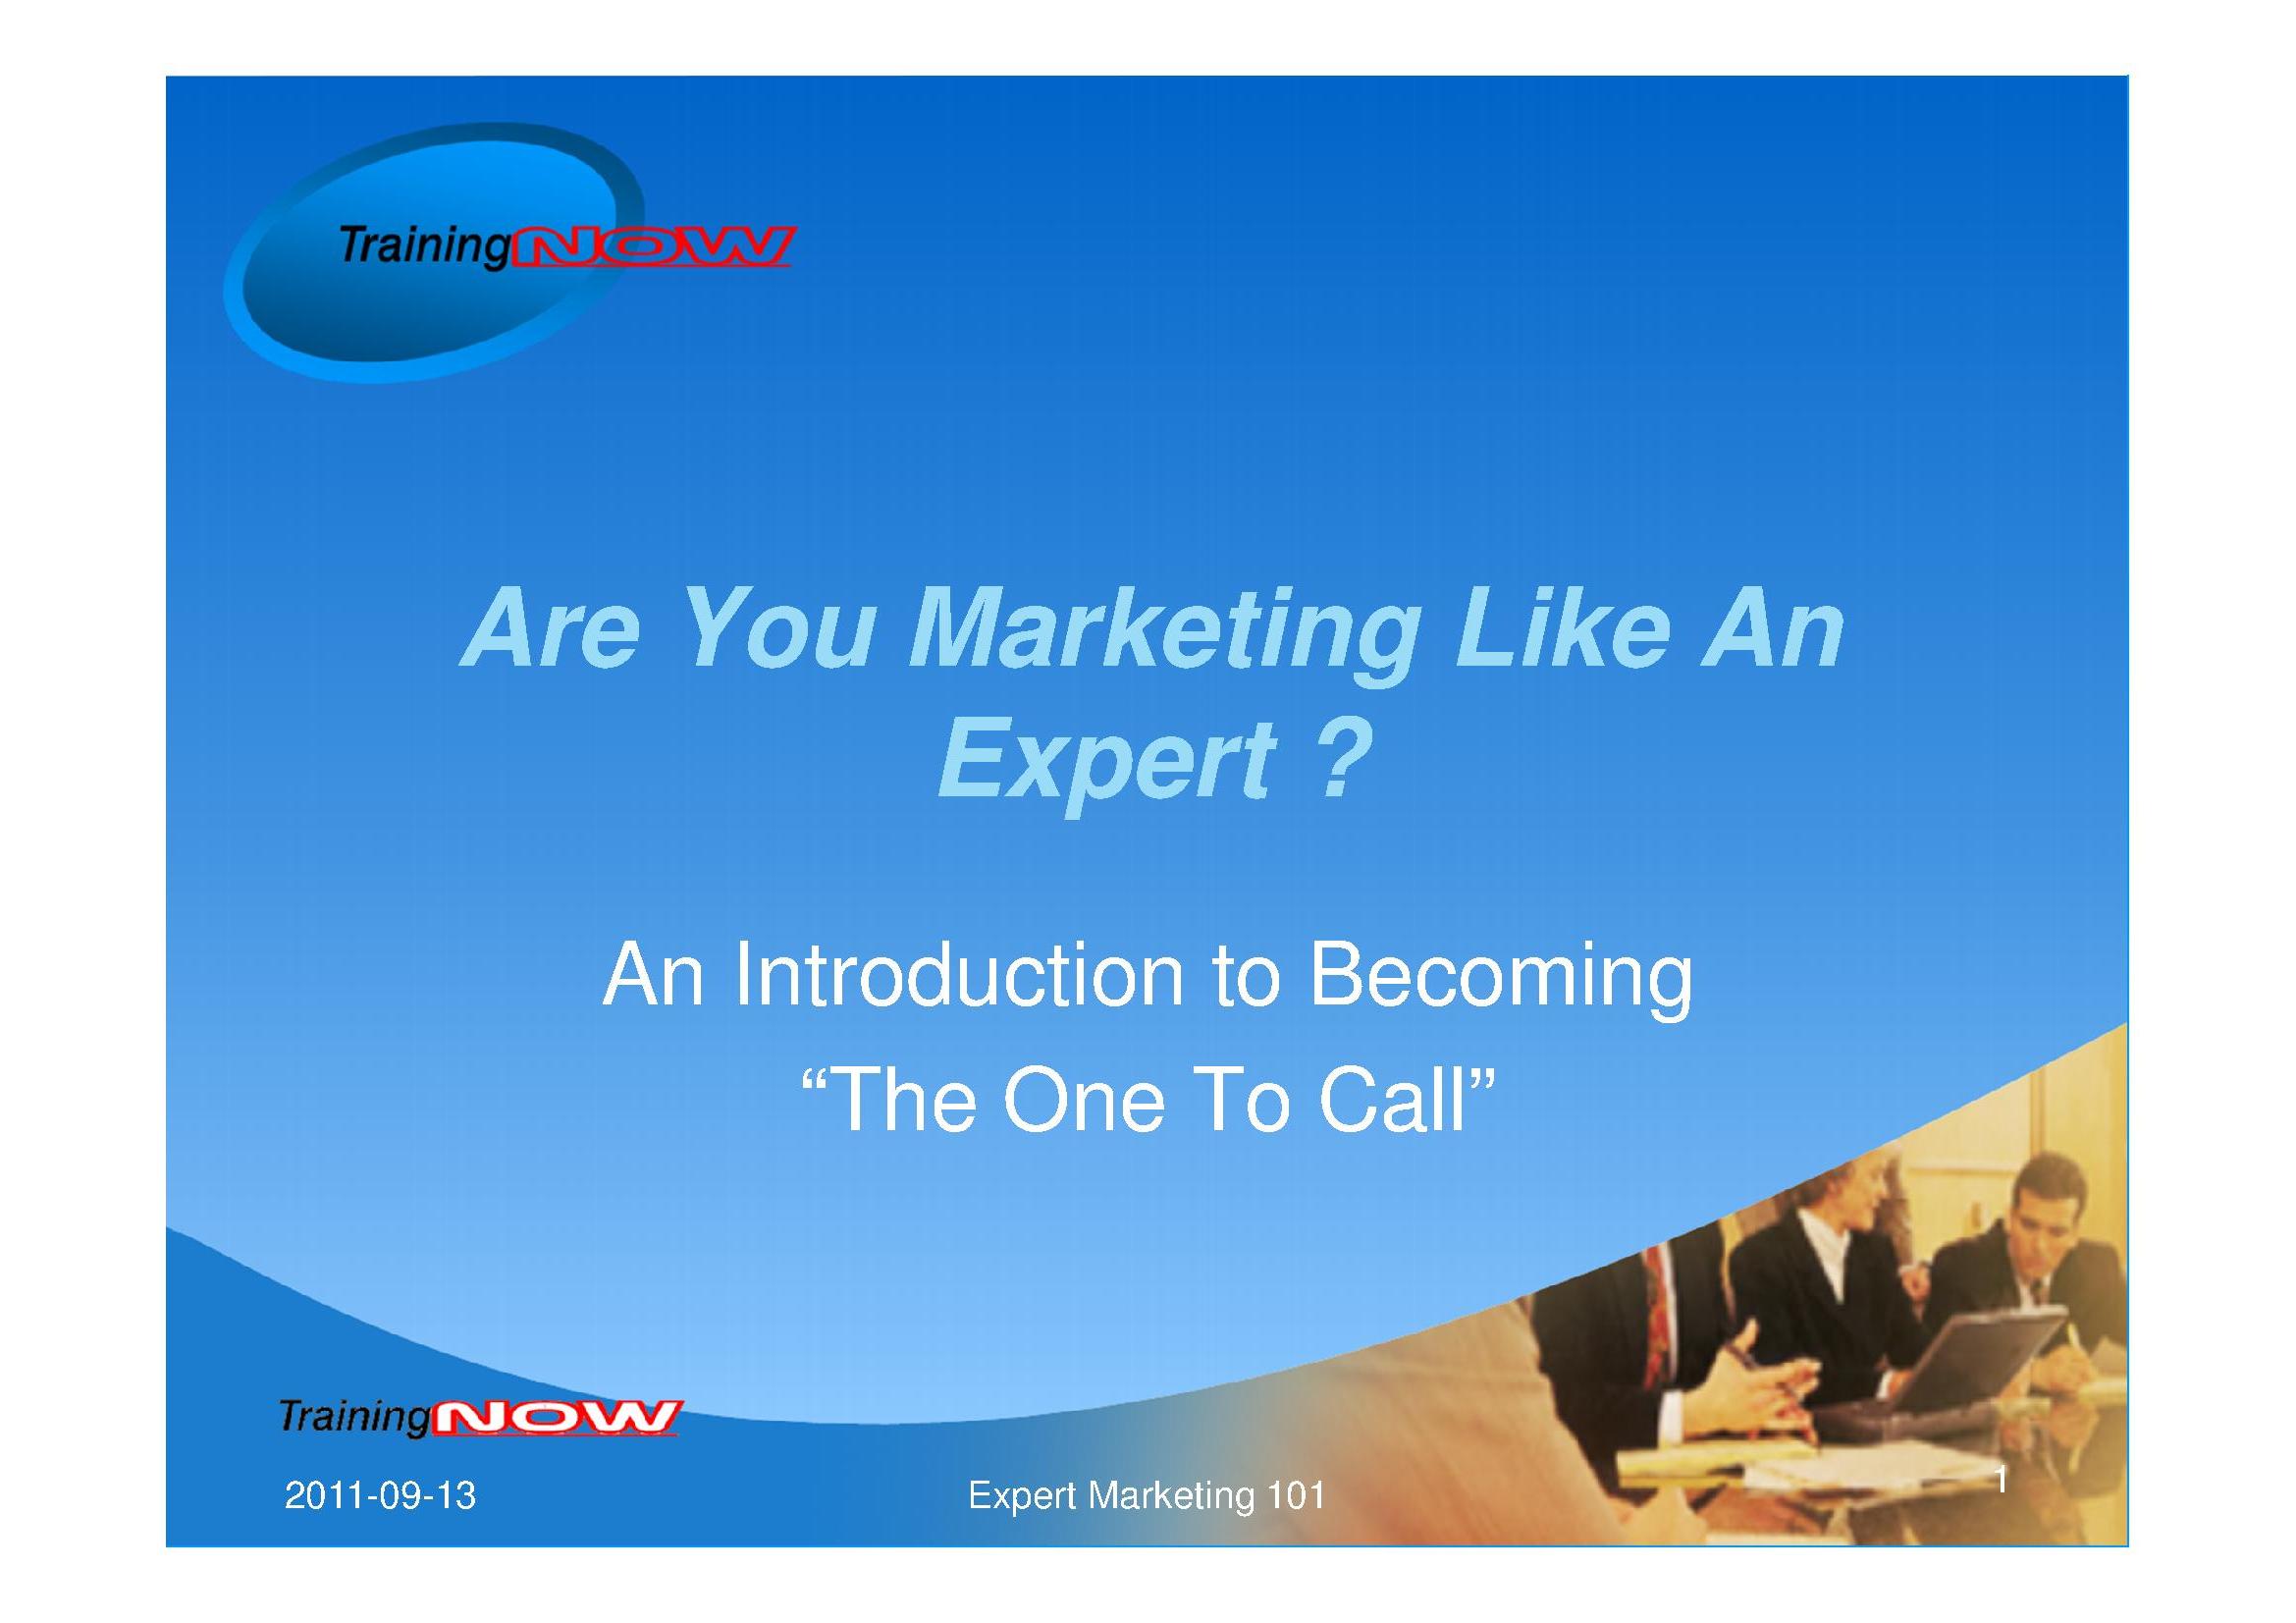 Expert Marketing 101: Becoming the One to Call